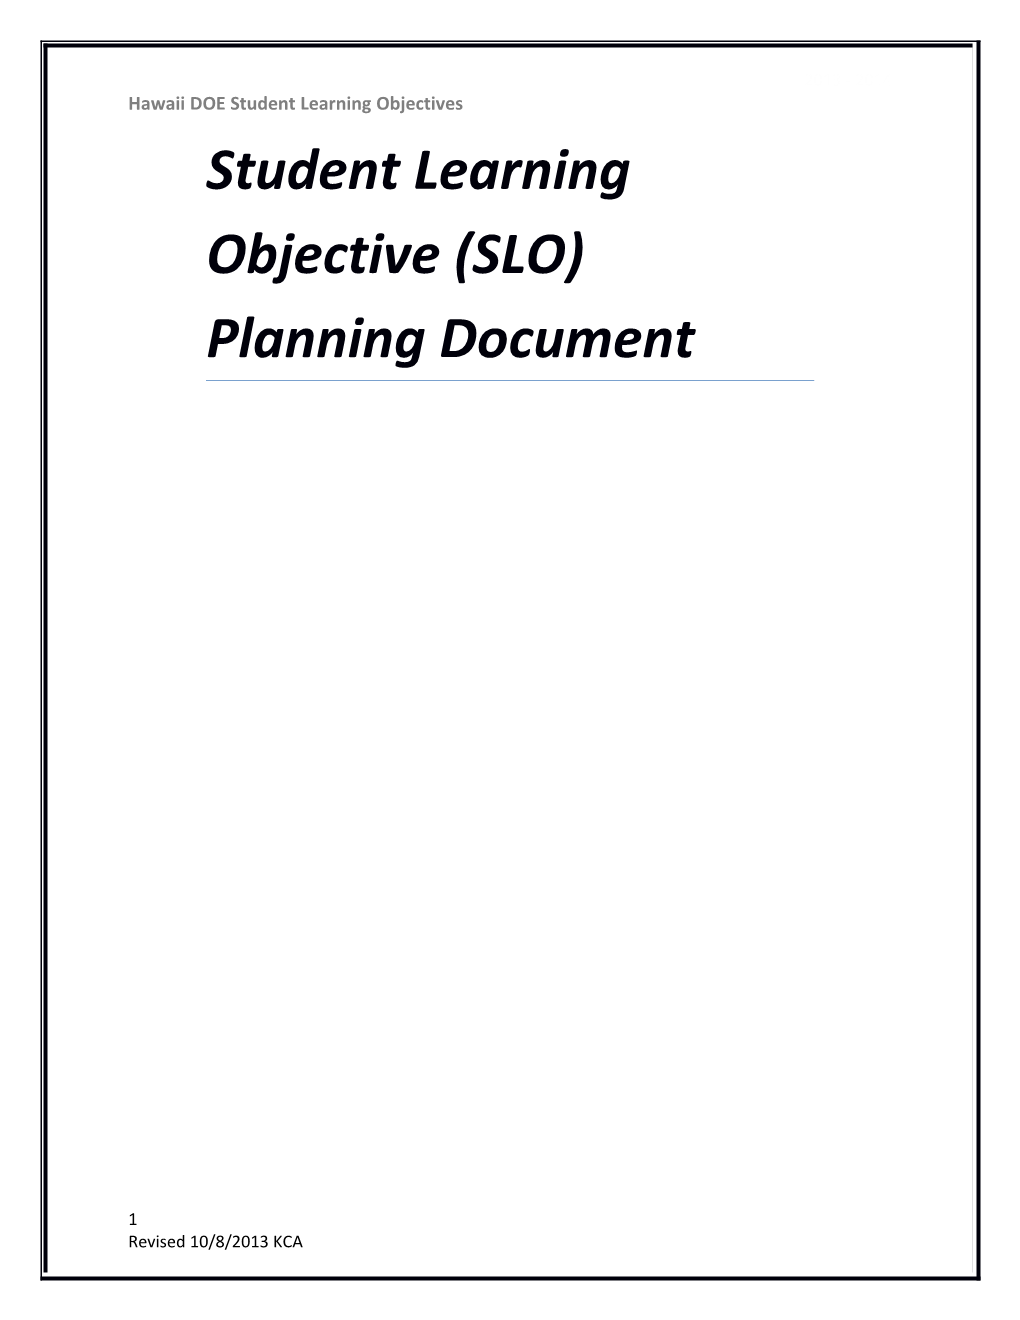 Student Learning Objective (SLO) Planning Document